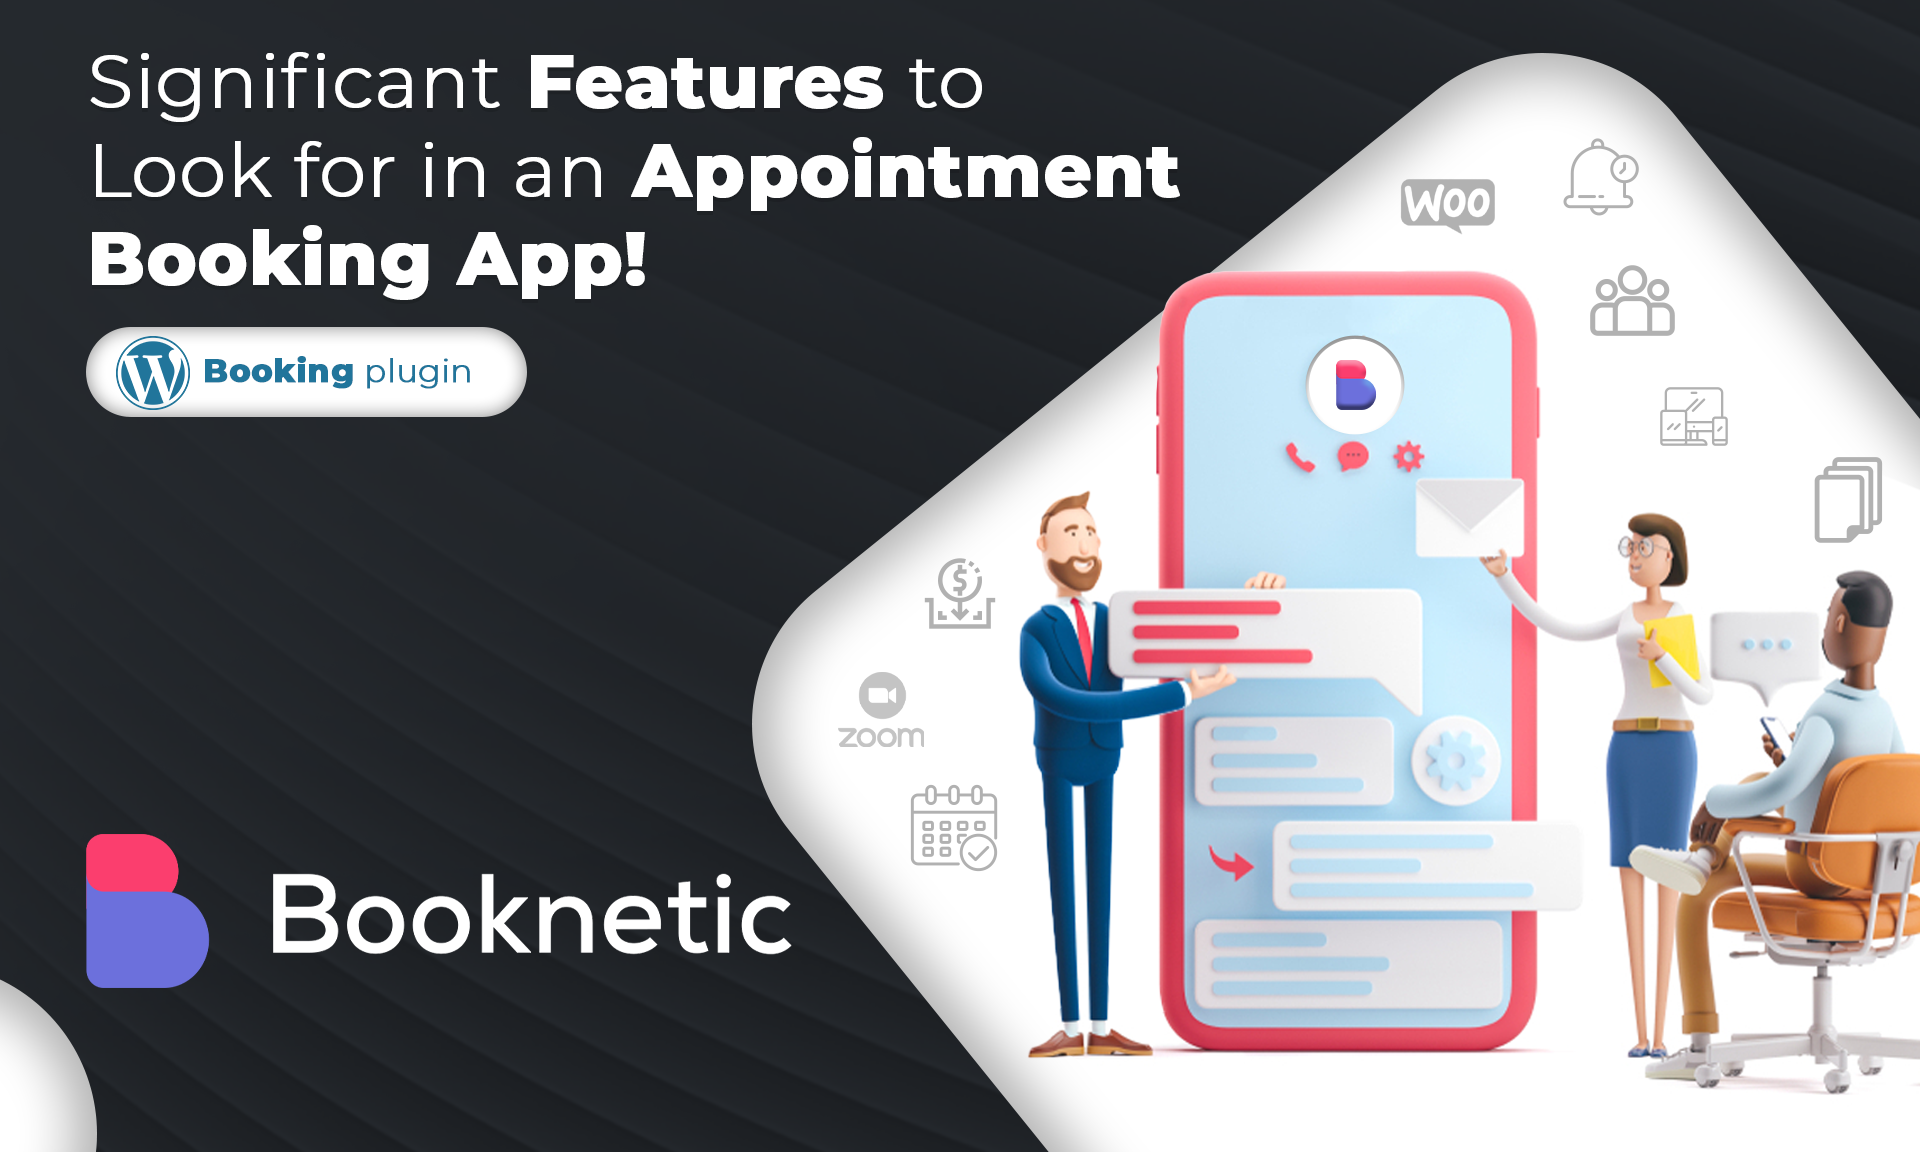 Significant Features to Look for in an Appointment Booking App